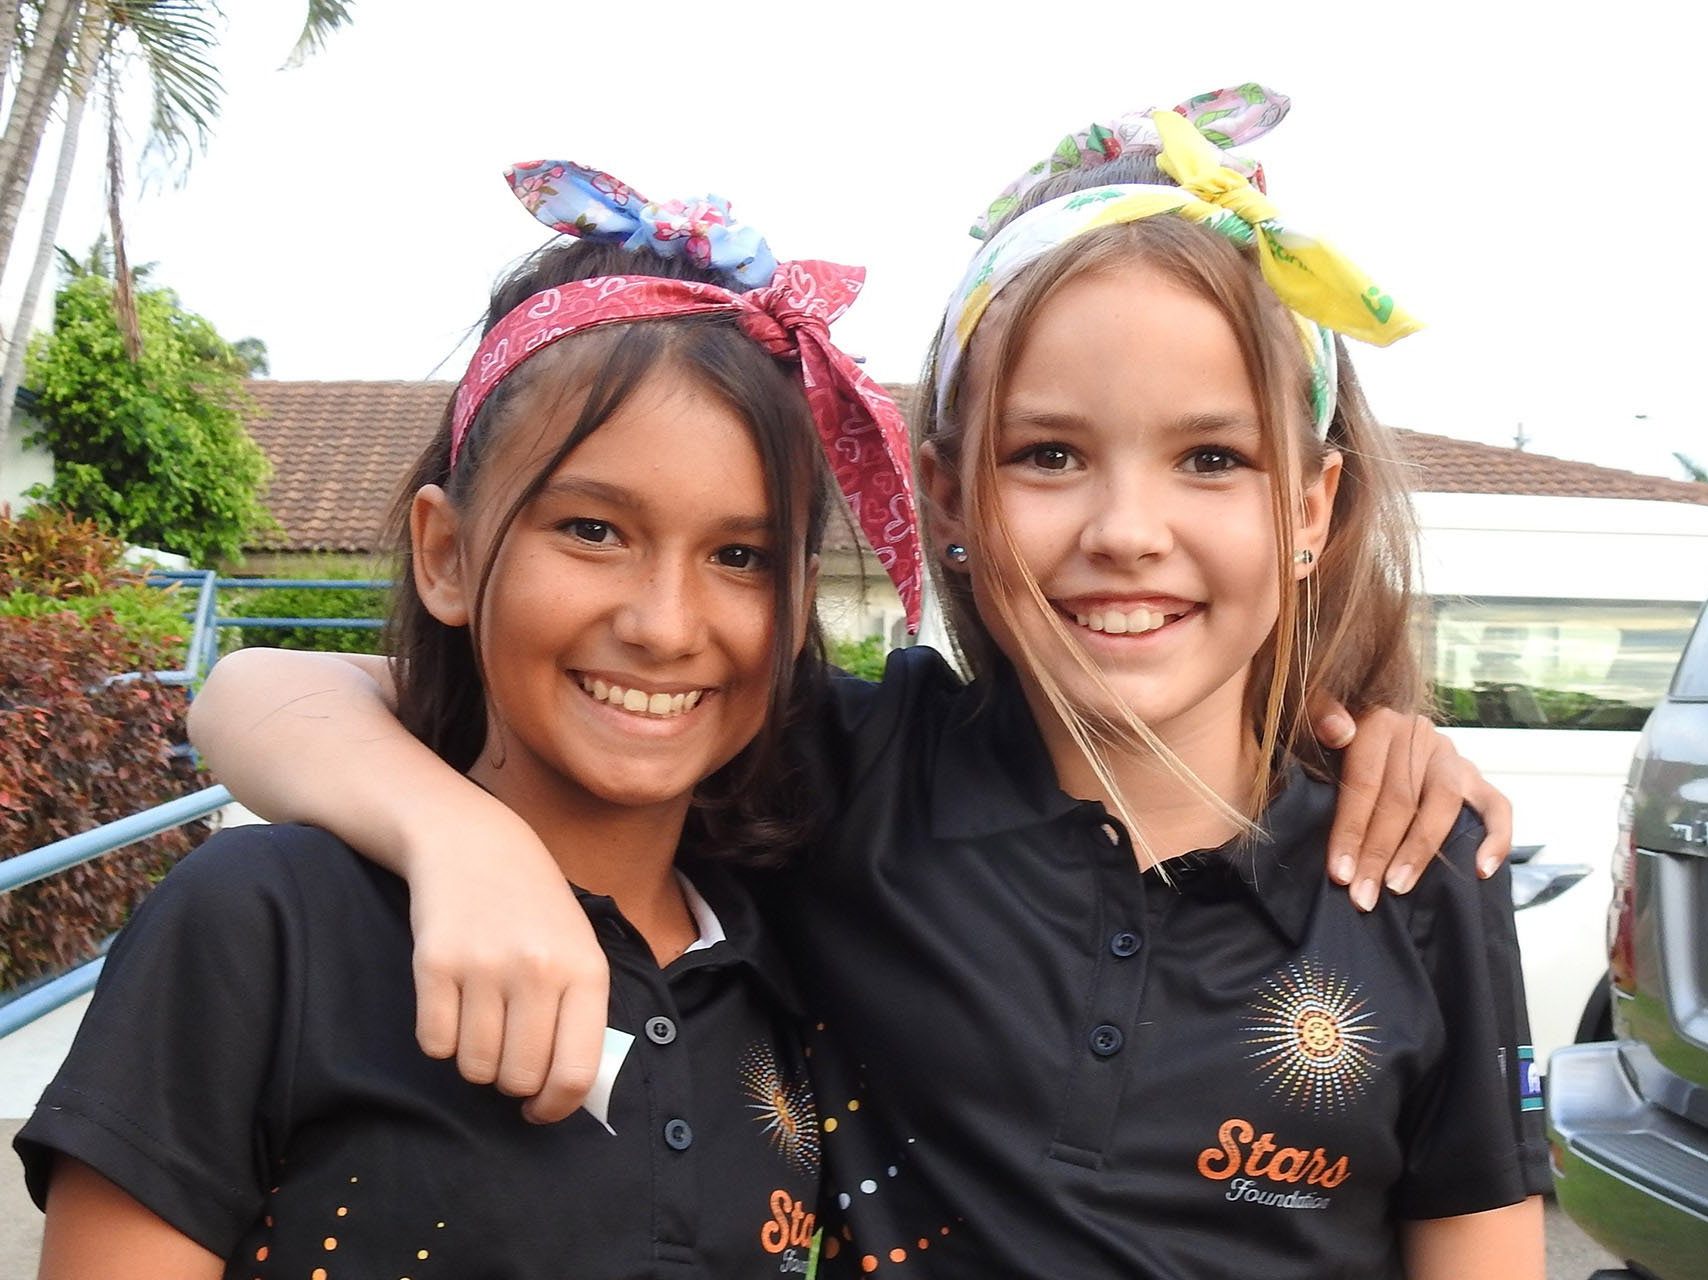 an Image of Two Young Girls Wearing Shirts with the 'Star Foundation' logo.